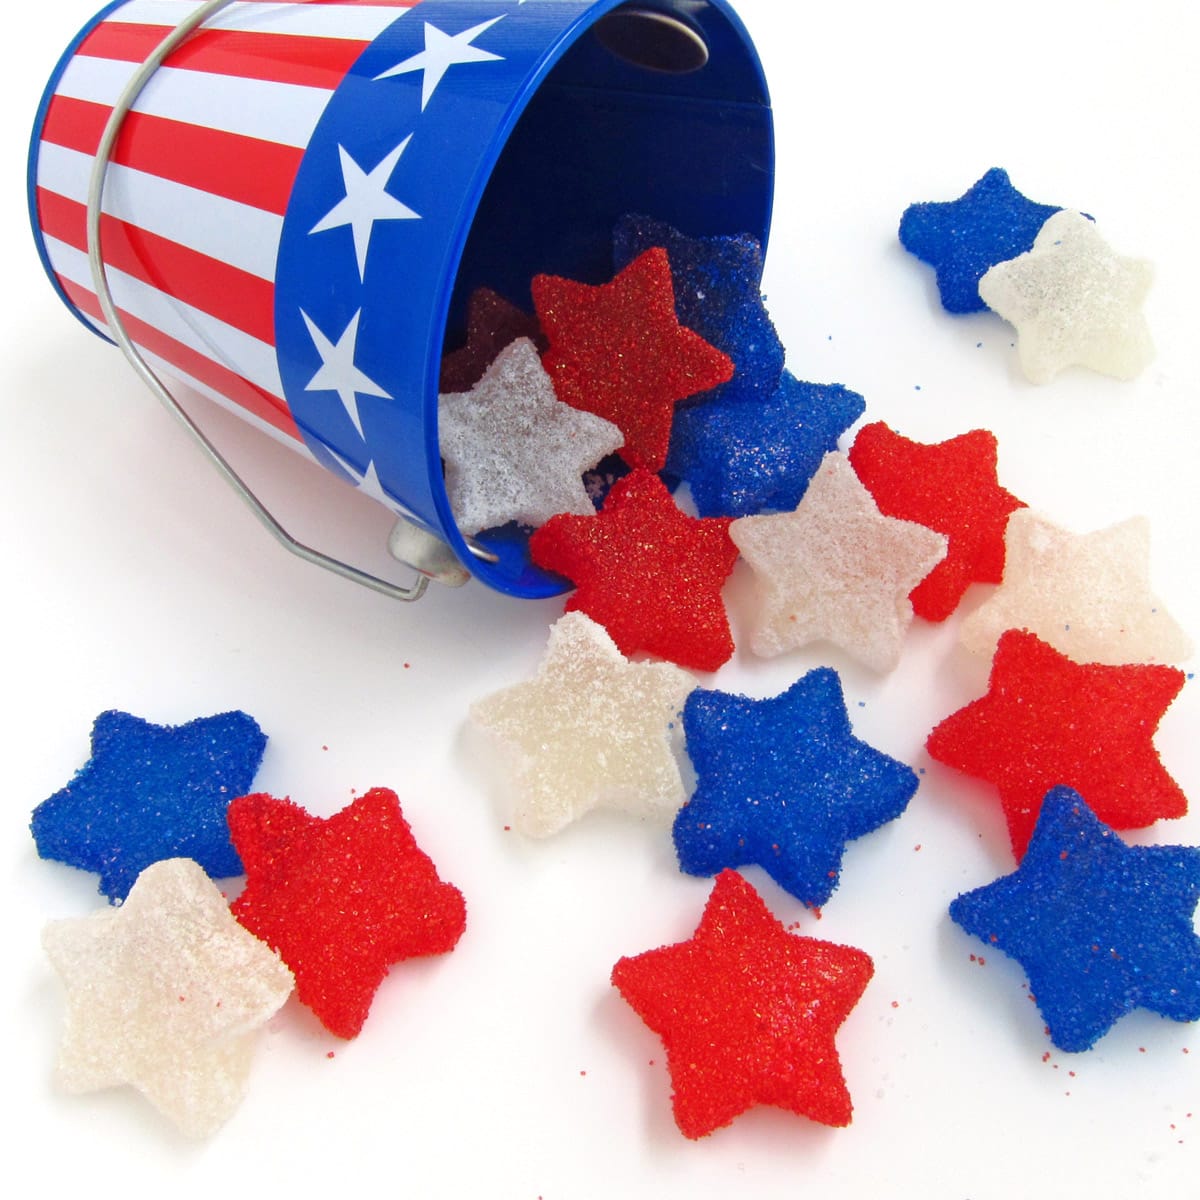 red, white, and blue gumdrop stars spilling out of a 4th of July pail onto a white table.